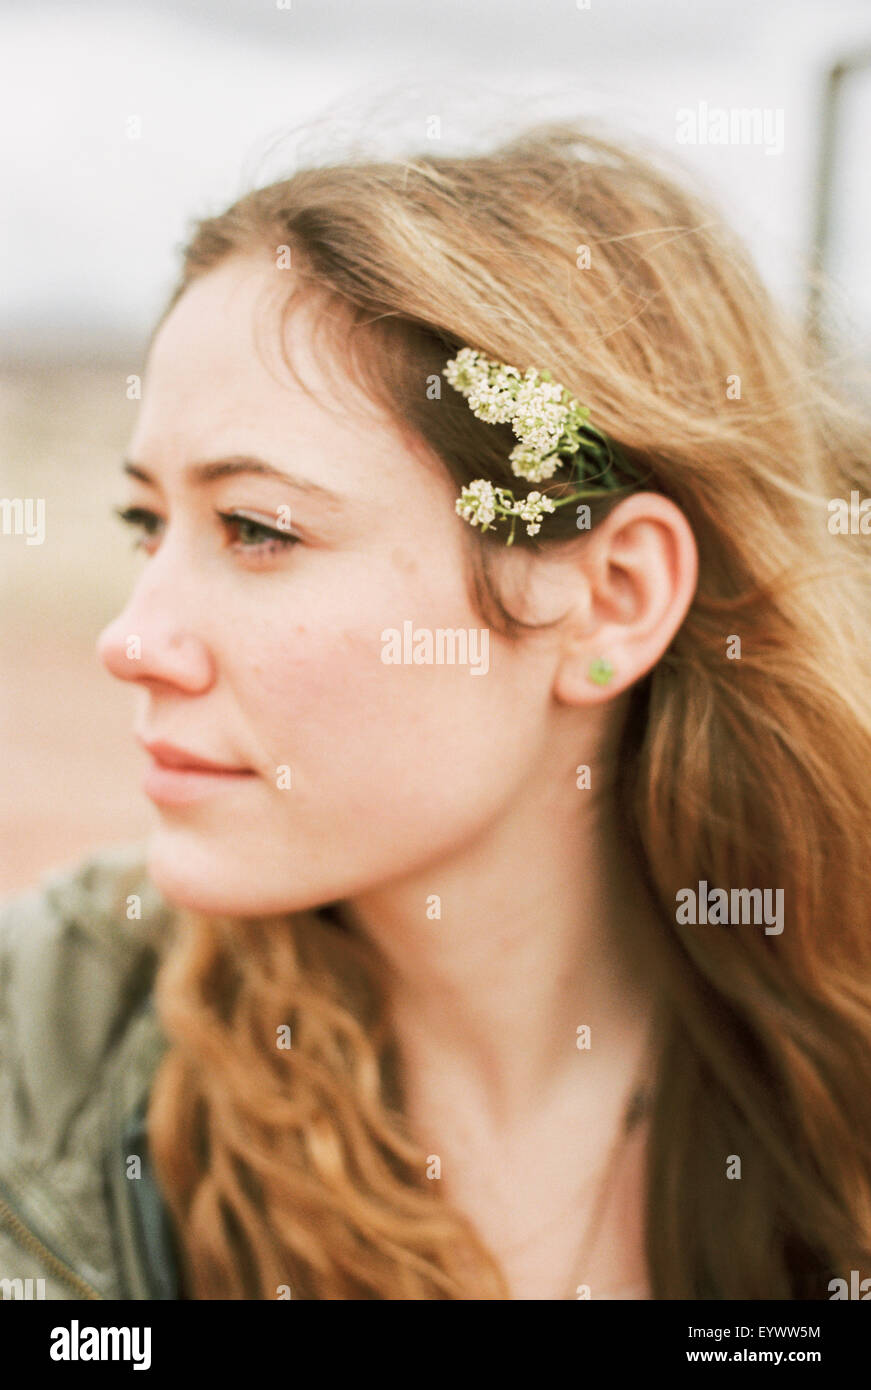 Head and shoulders portrait of a woman with a flower in her hair. Stock Photo